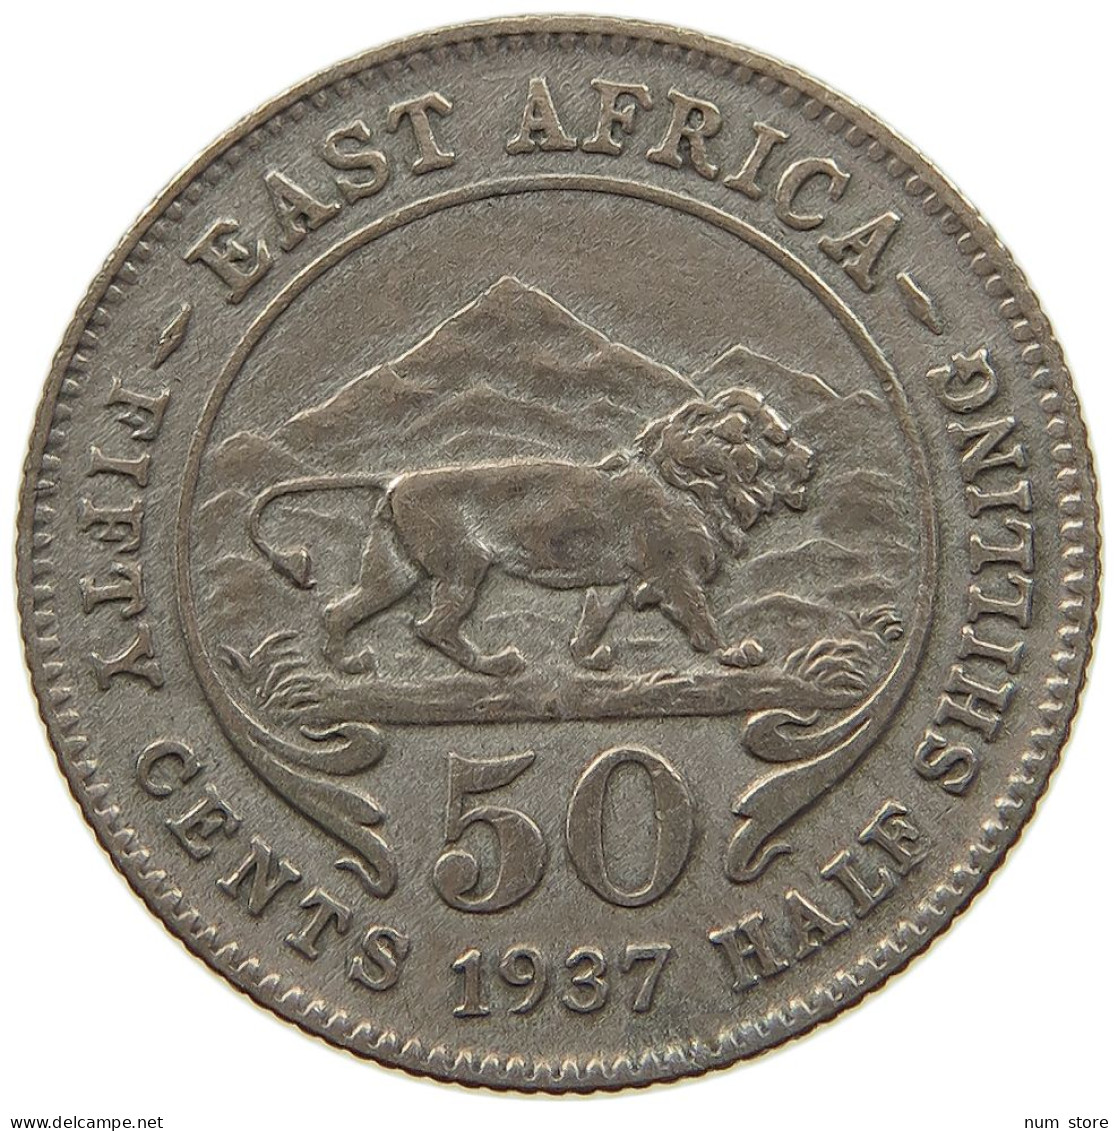 EAST AFRICA 50 CENTS 1937 GEORGE VI. (1936-1952) #MA 021362 - British Colony